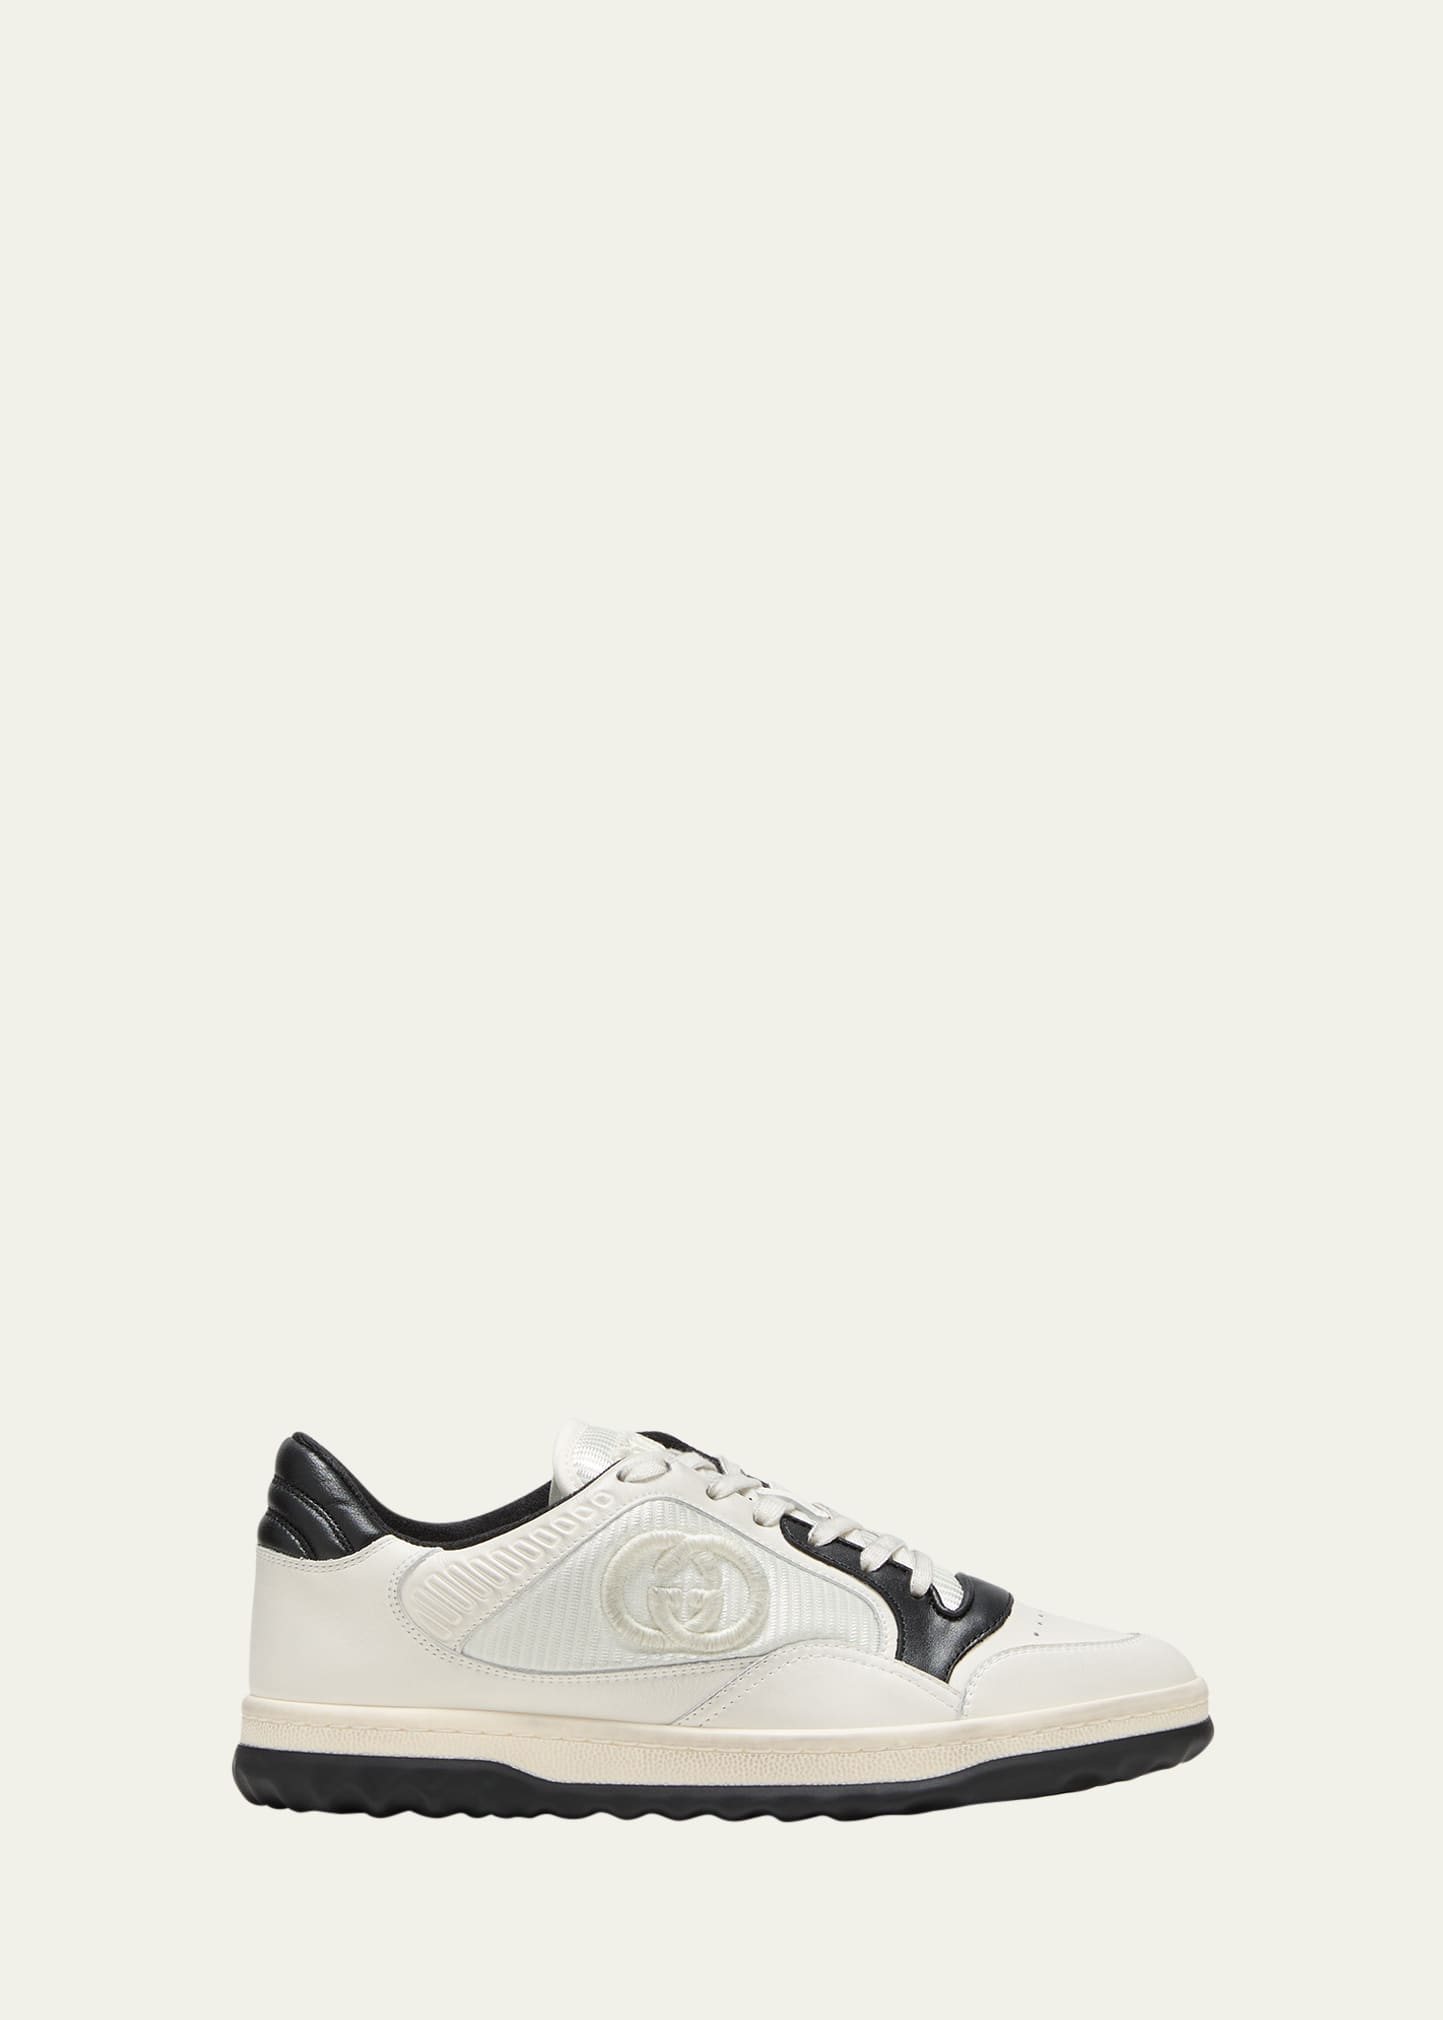 Gucci Bicolor Leather Low-top Sneakers, White, Women's, 36eu, Sneakers & Trainers Low-top Sneakers